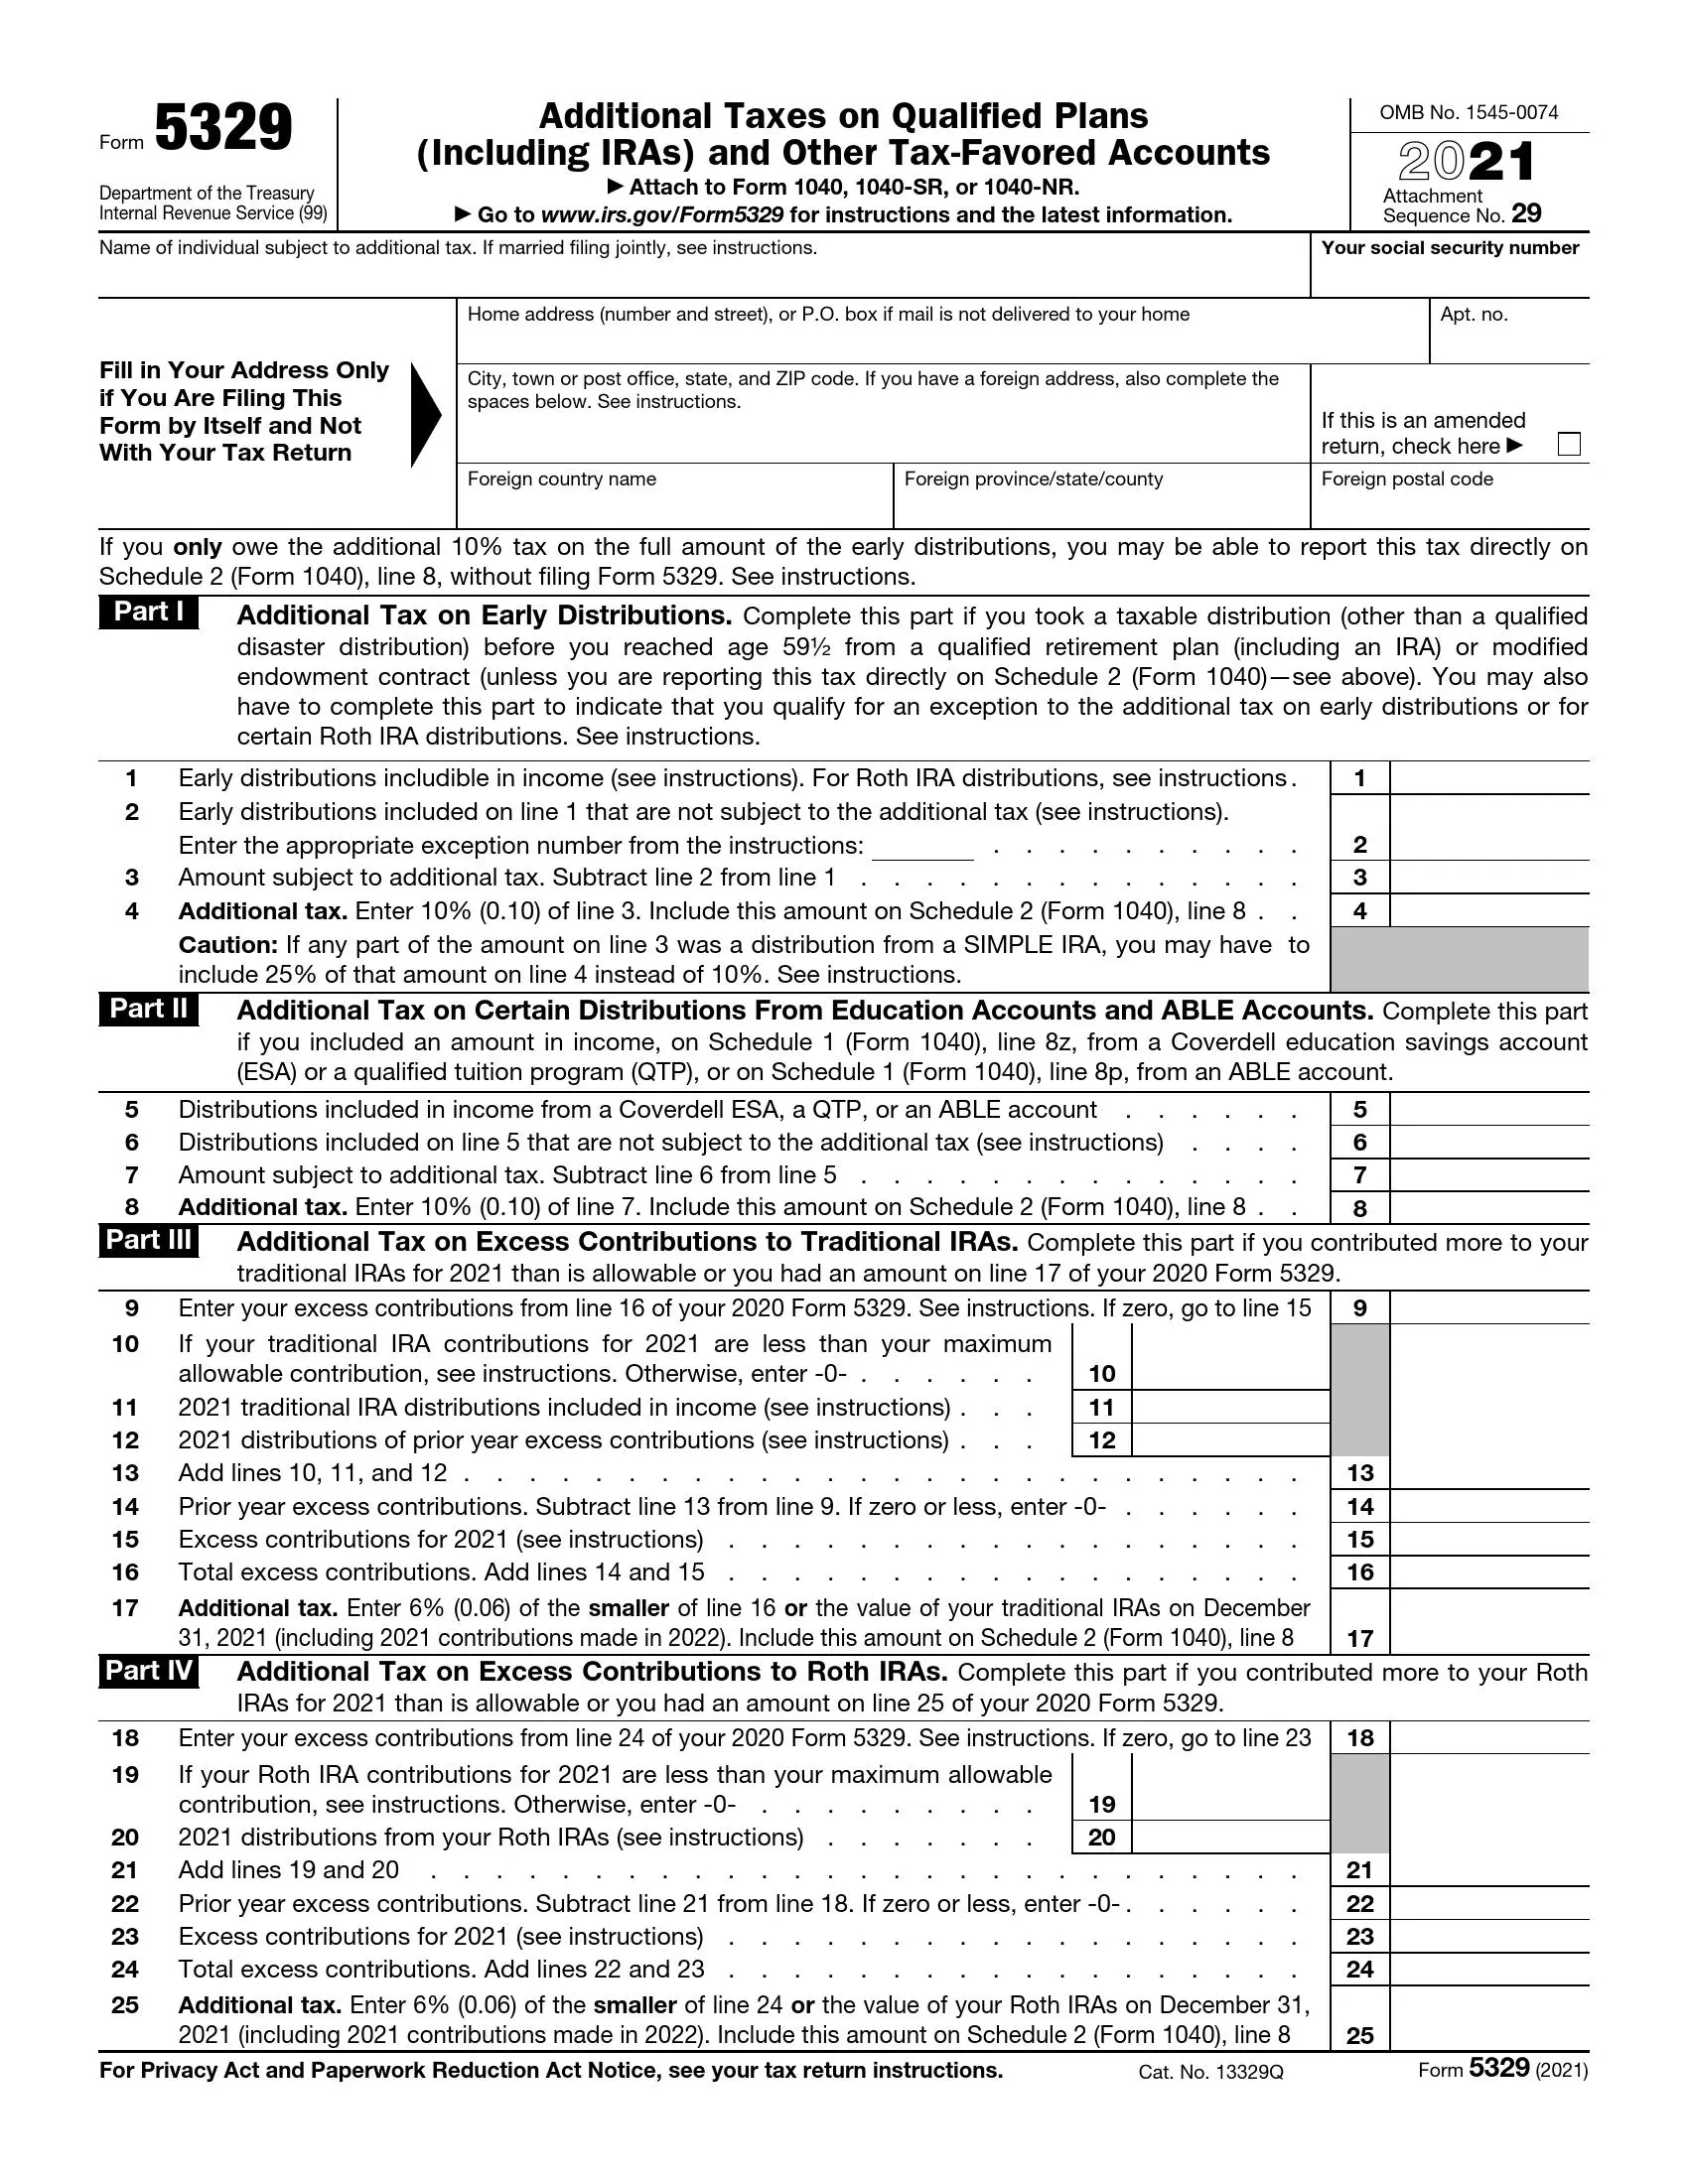 irs form 5329 2021 preview